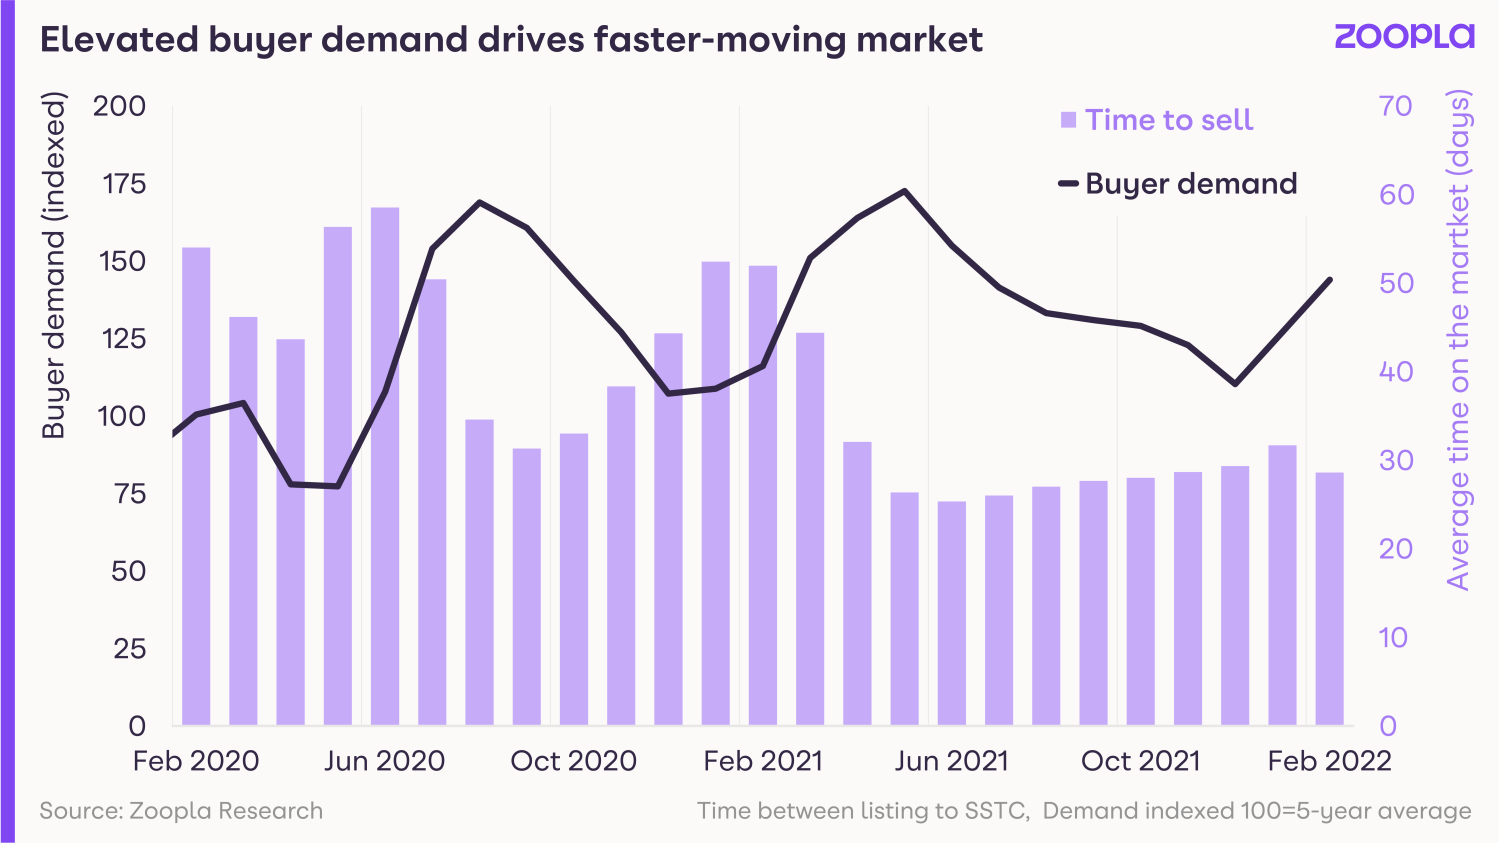 HPI February 2022 - elevated buyer demand drives faster moving market